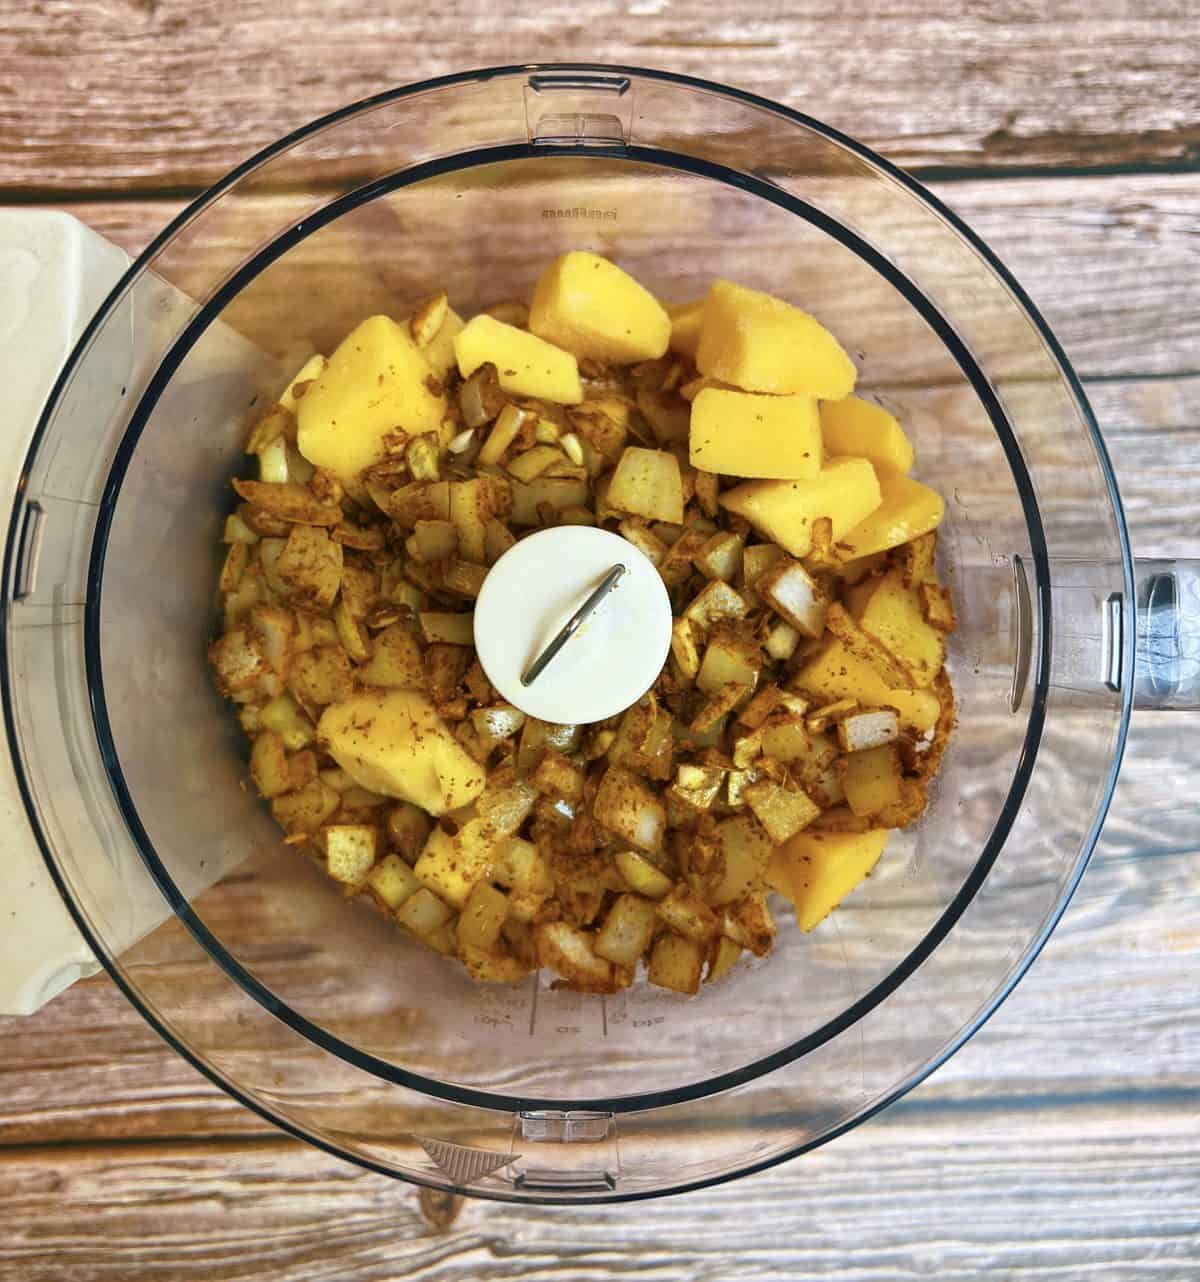 Mango, onion, garlic, ginger and spices in food processor